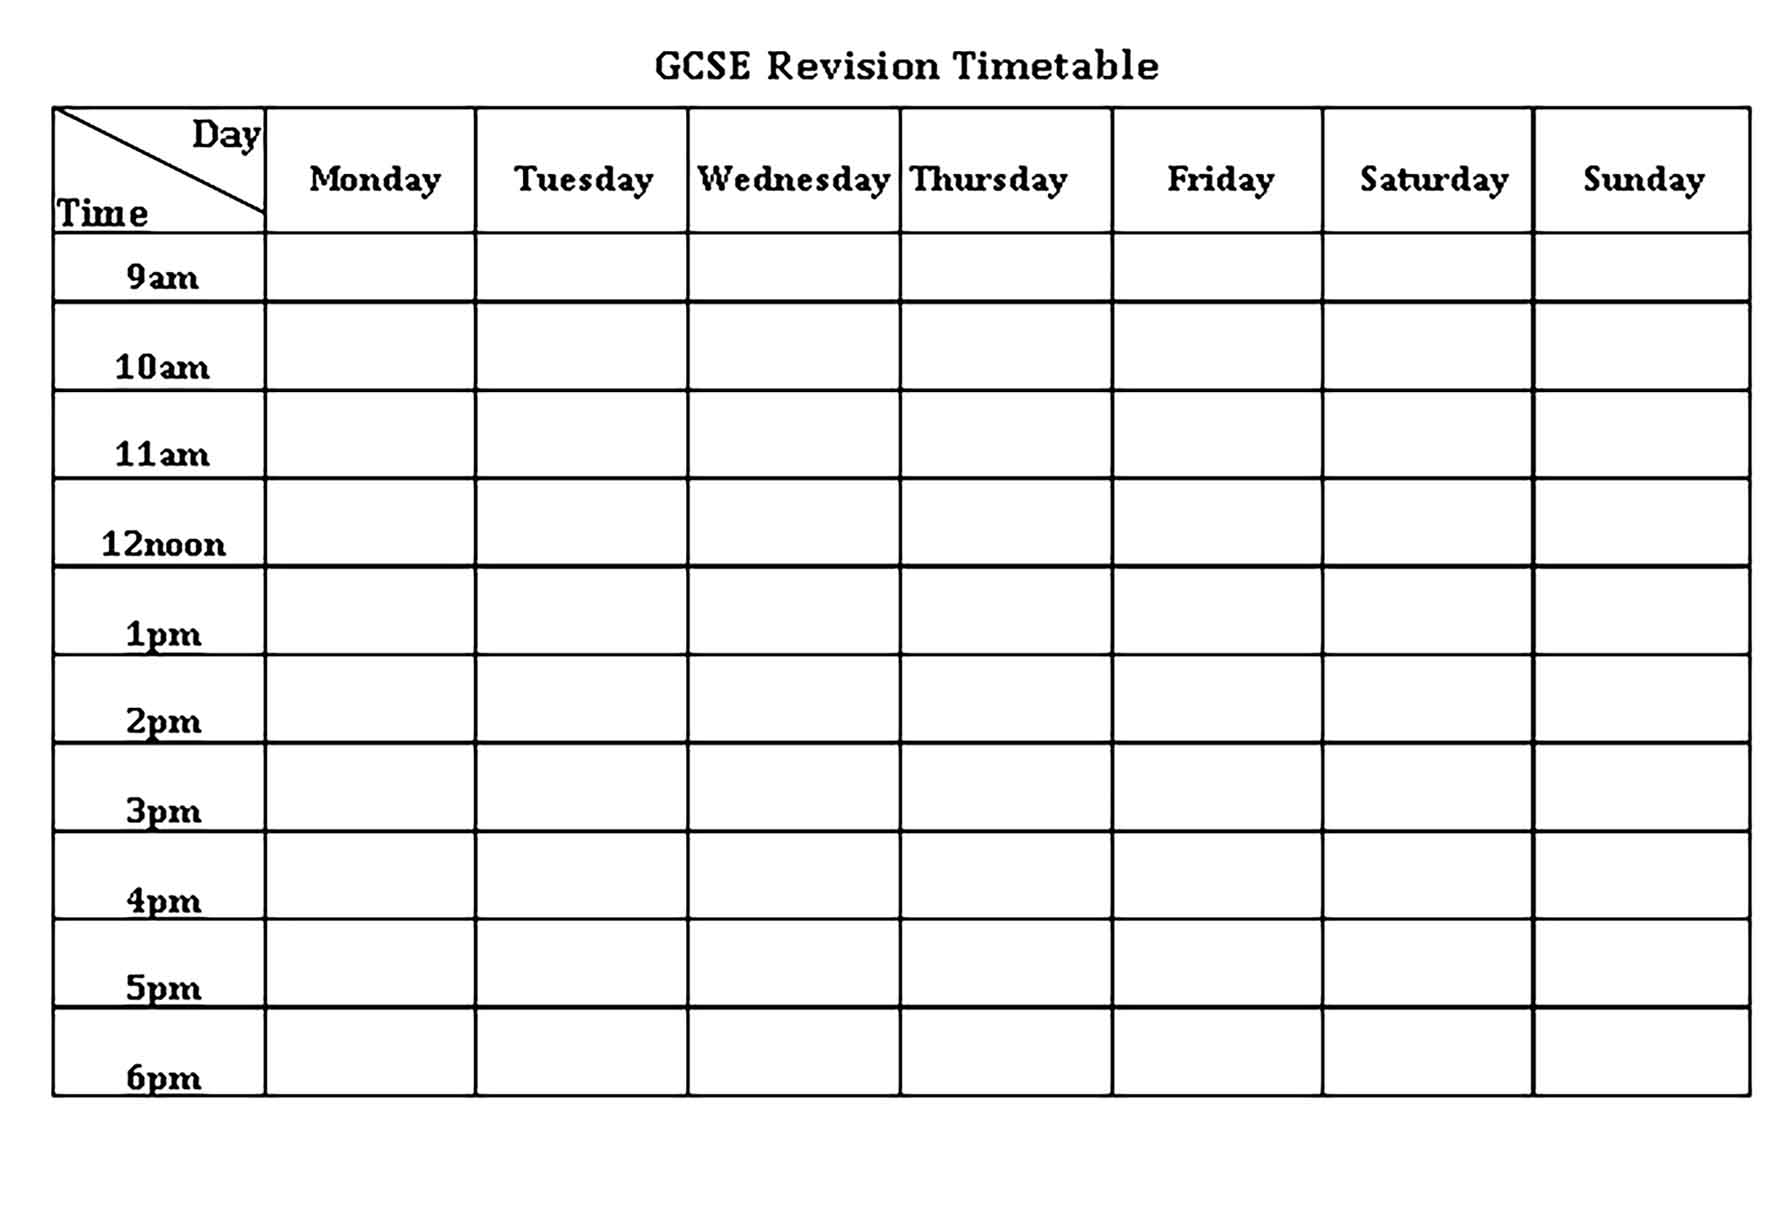 Template GCSE Revision Timetable Sample